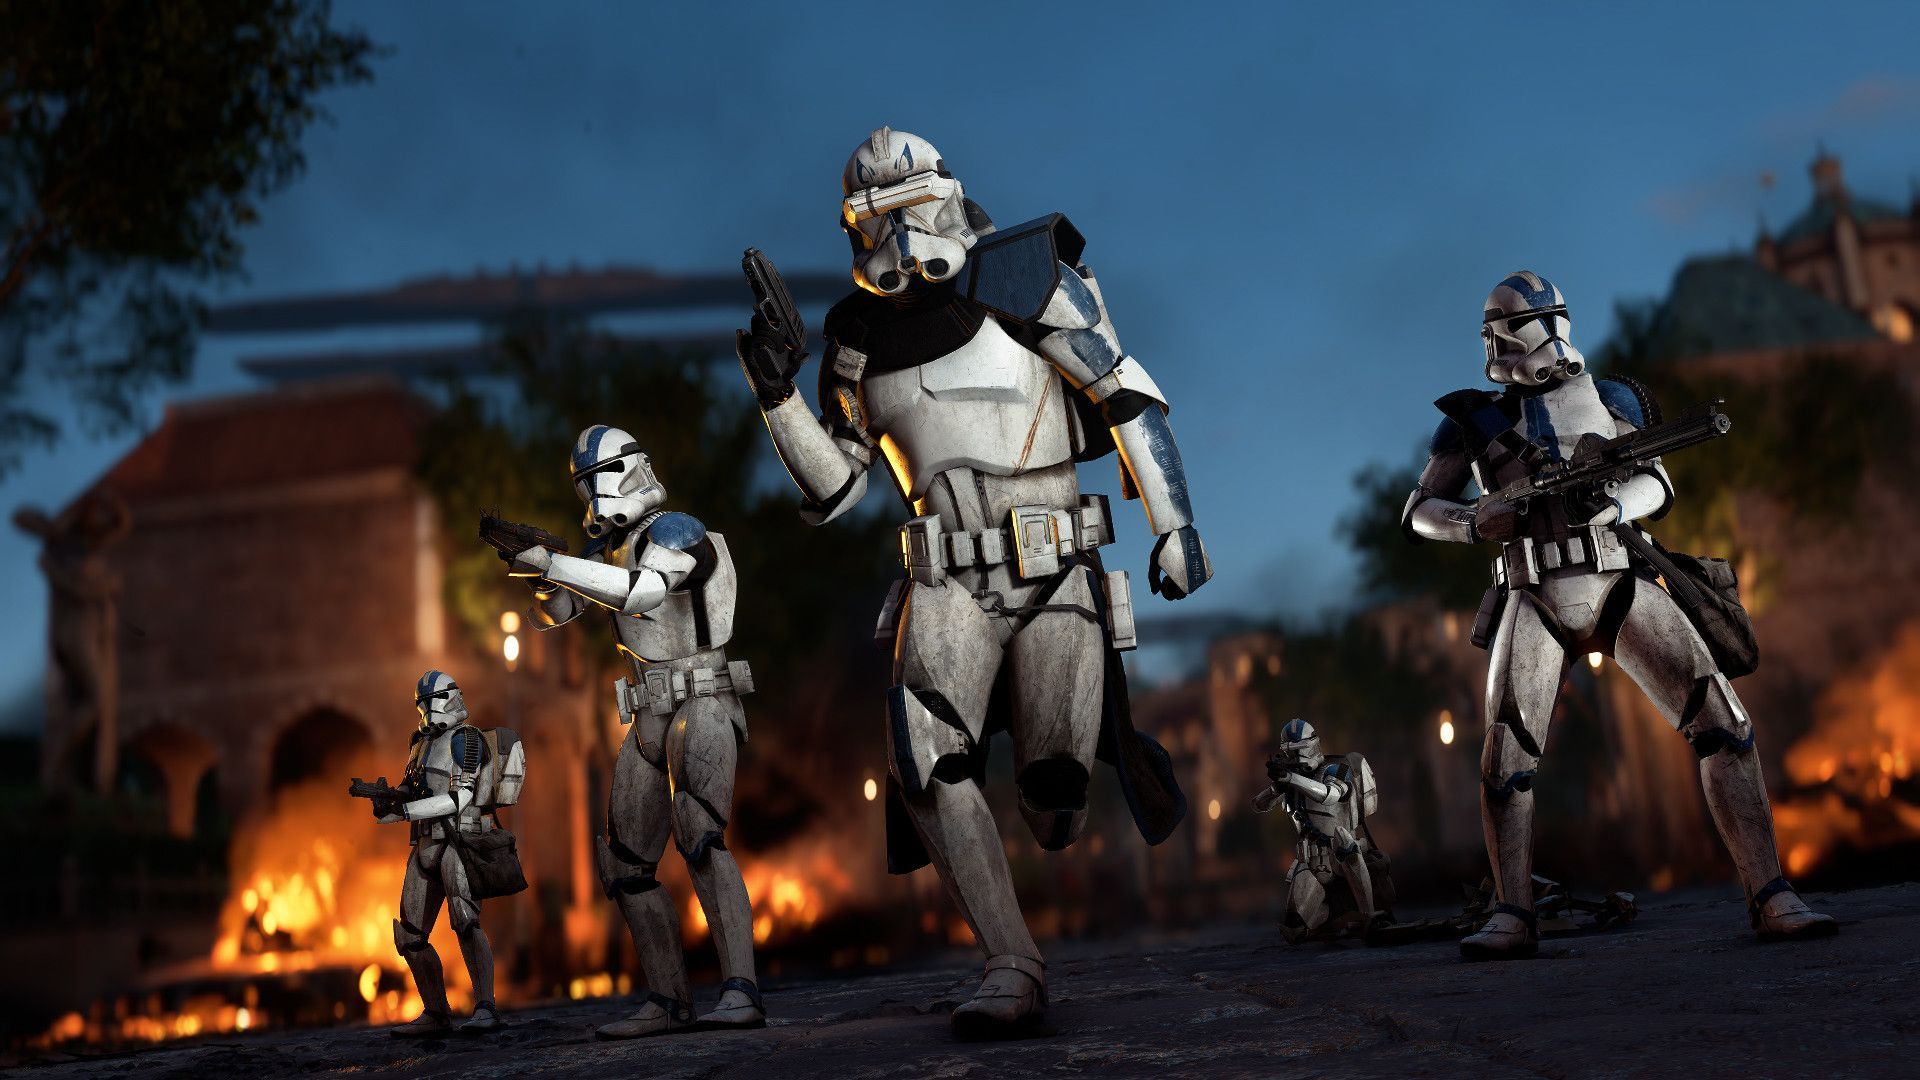 Star Wars Battlefront II Game Photography, Cinematic Captures. Star wars image, Star wars picture, Star wars painting